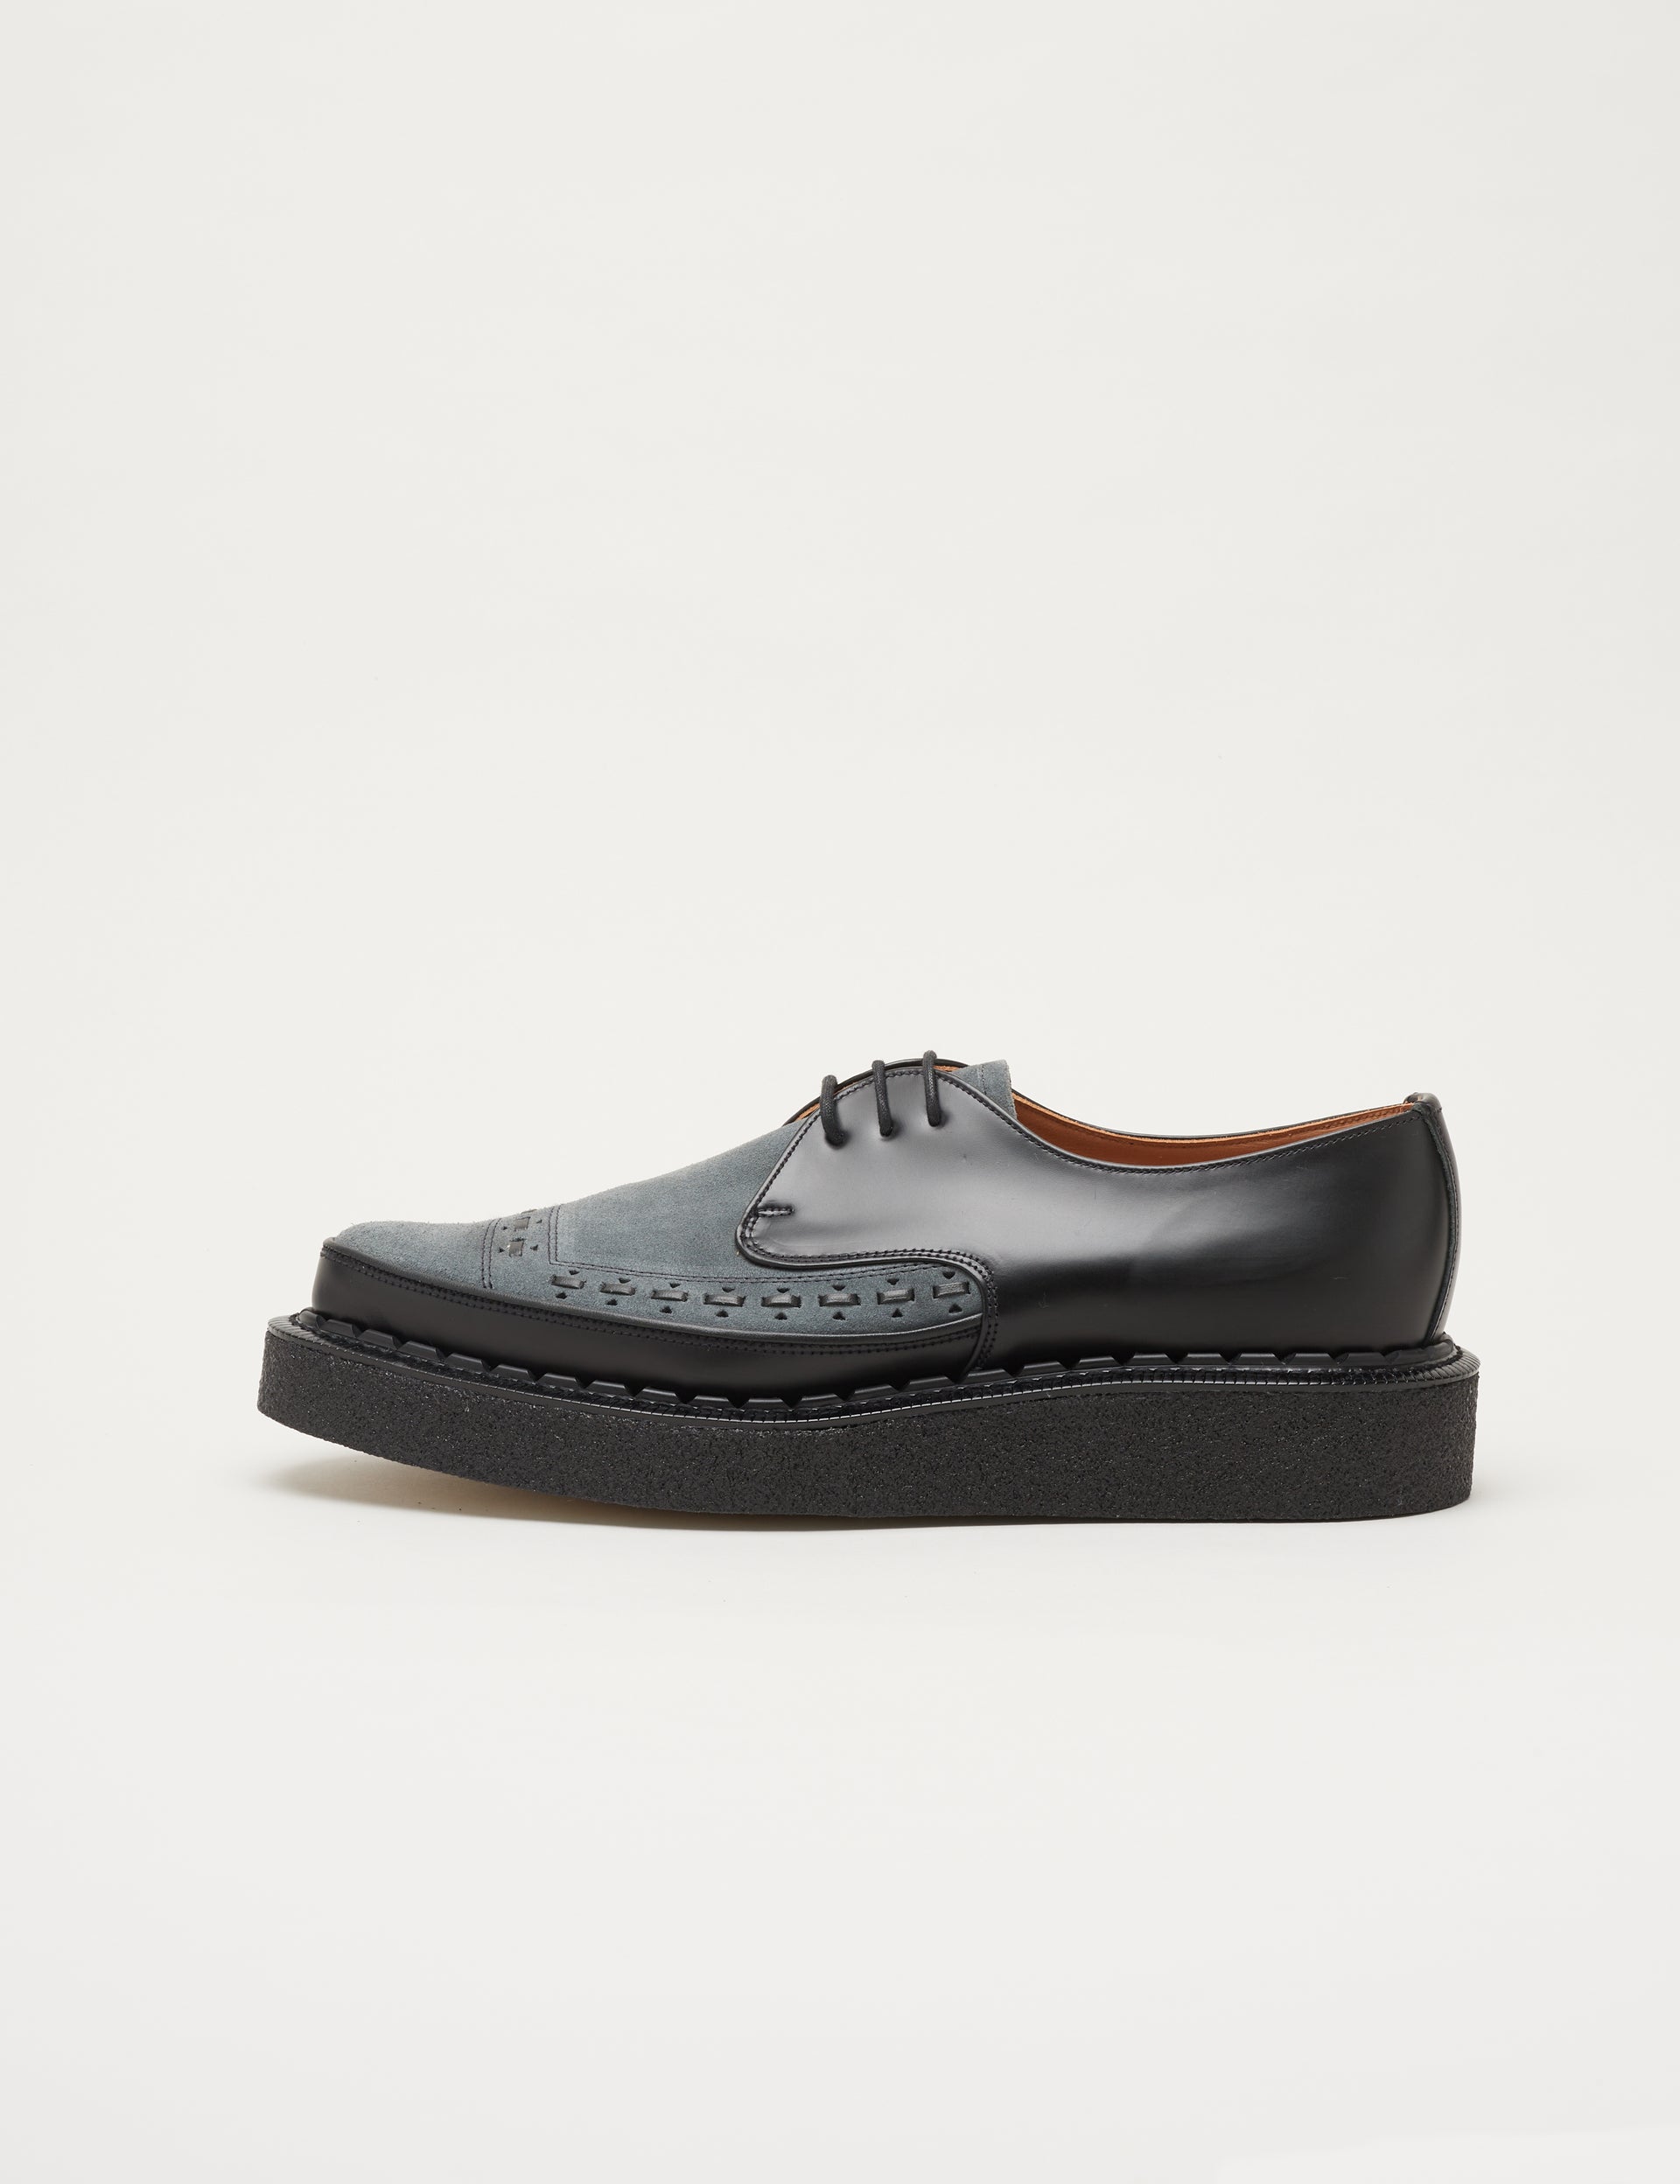 Diano Black/Charcoal Suede